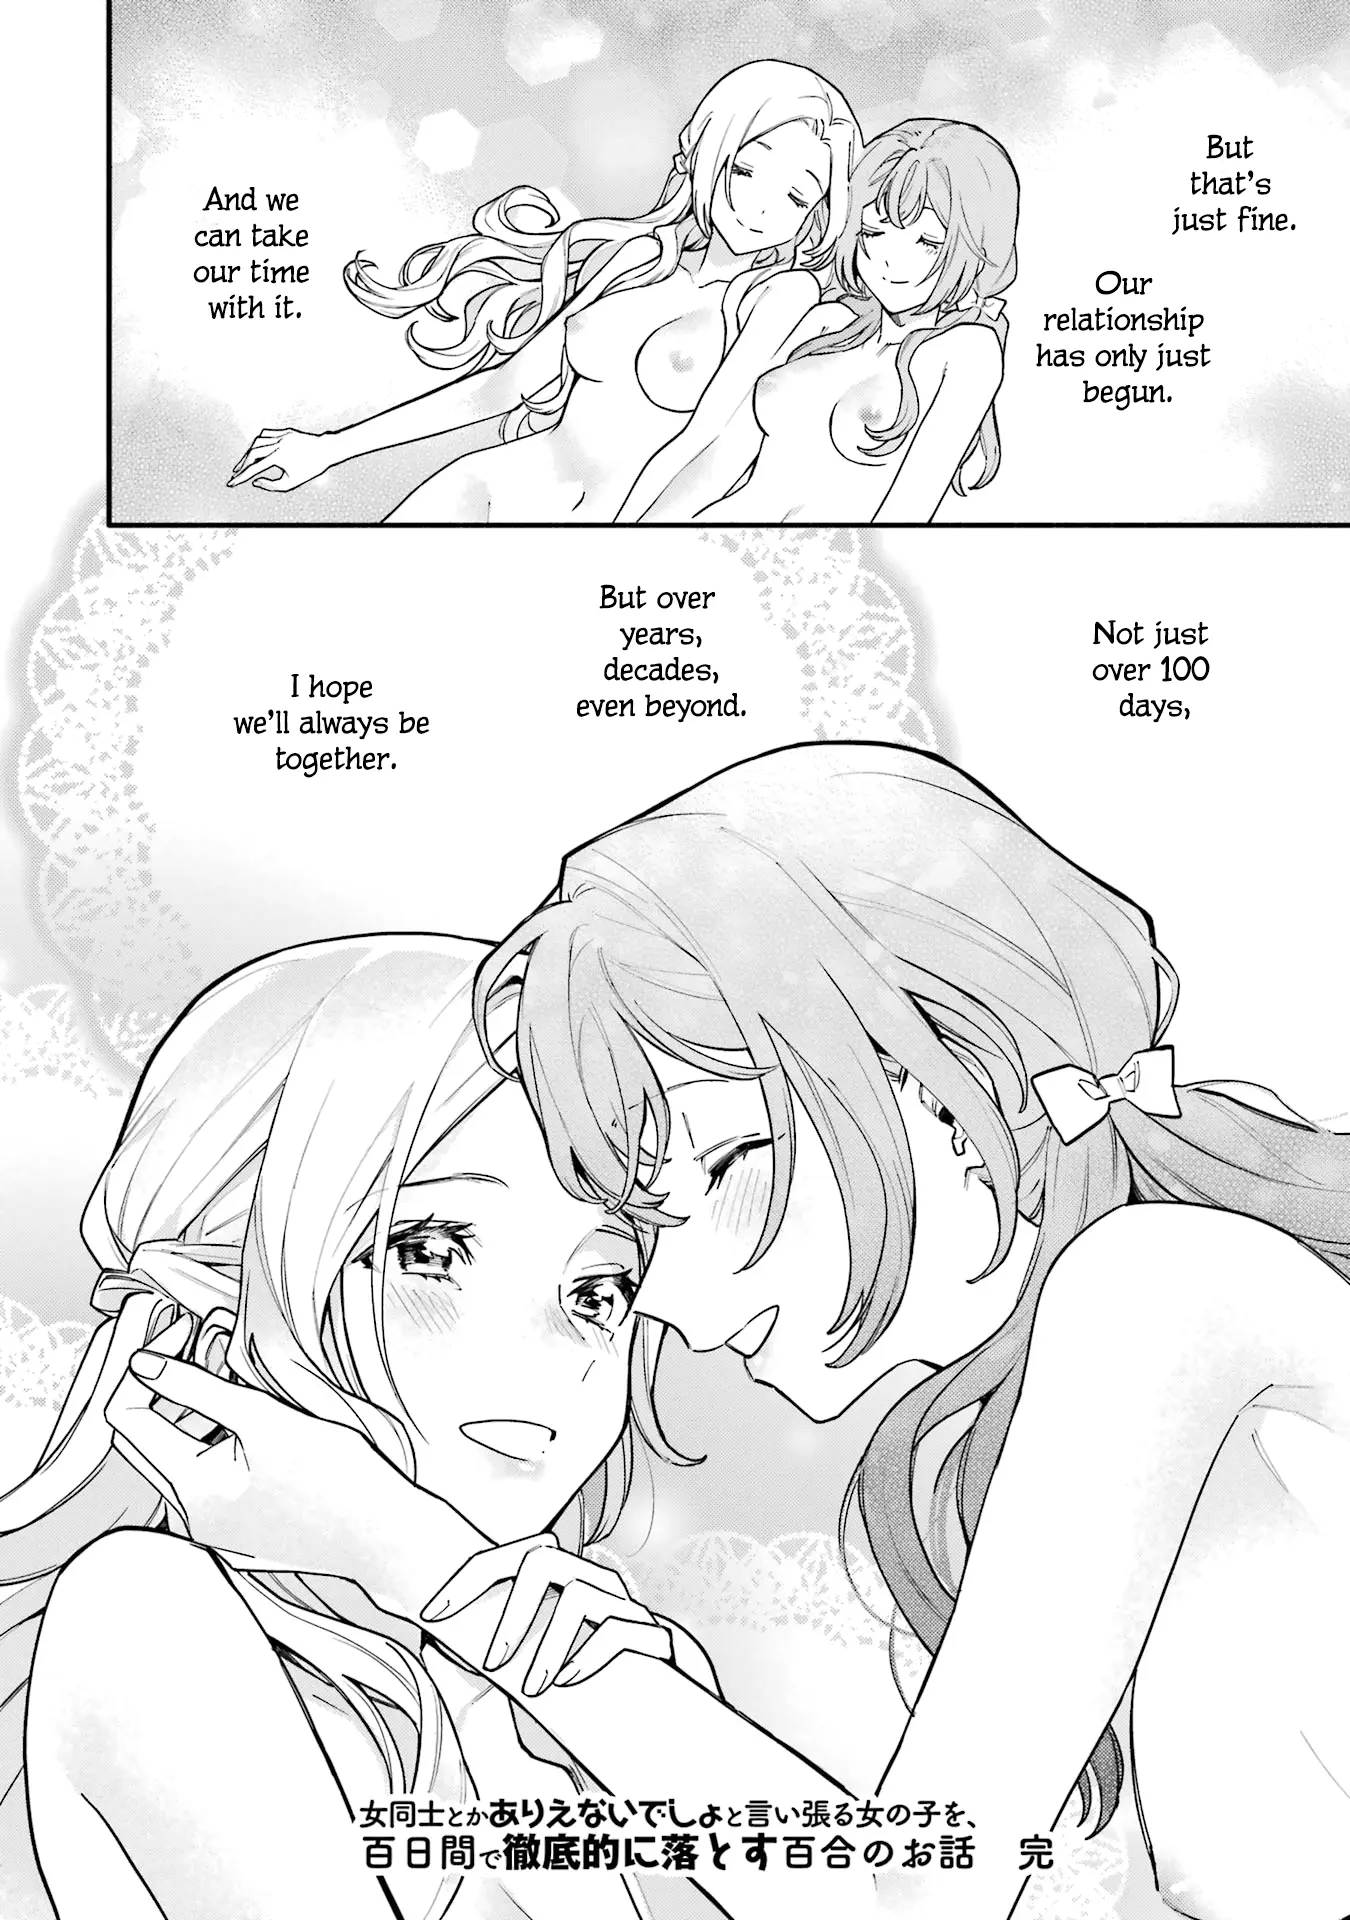 A Yuri Story About A Girl Who Insists "it's Impossible For Two Girls To Get Together" Completely Falling Within 100 Days - 15 page 40-327f1357